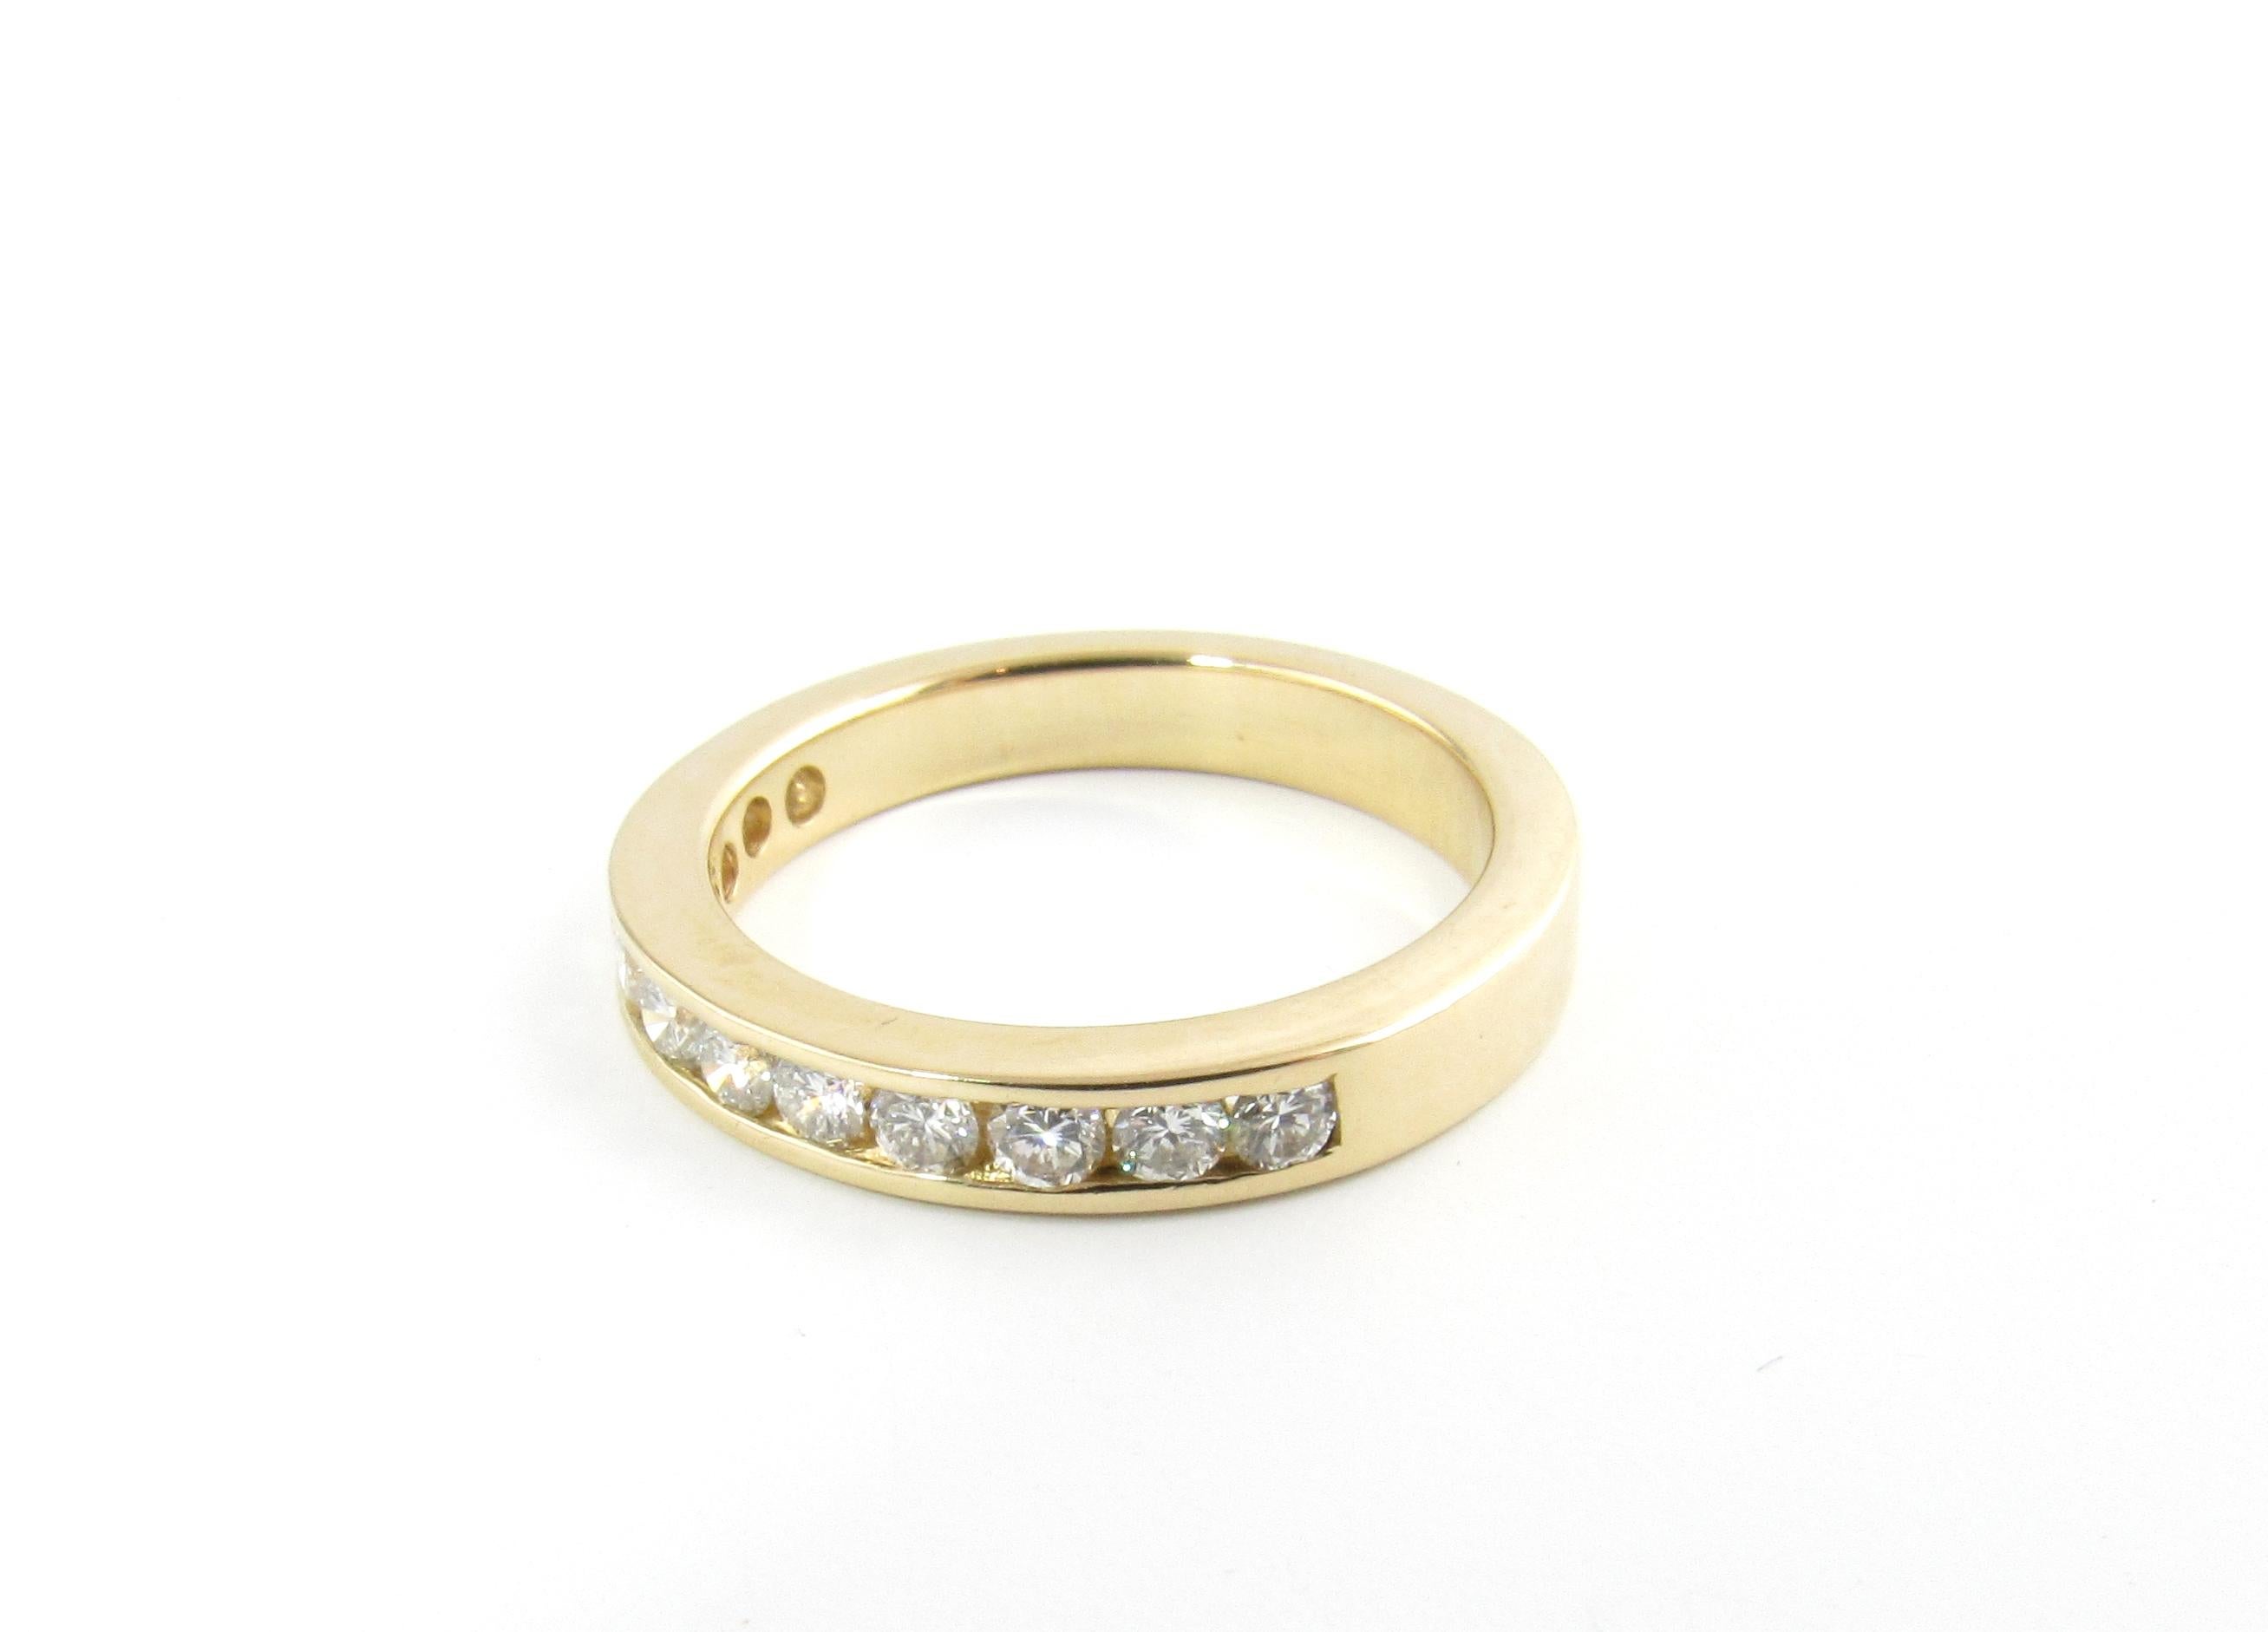 Vintage 14 Karat Yellow Gold Diamond Wedding Band Size 7.25

This sparkling band features 13 round brilliant cut diamonds set in classic 14K yellow gold. Width: 3 mm.

Approximate diamond weight: .48 ct.

Diamond color: G-H

Diamond clarity: